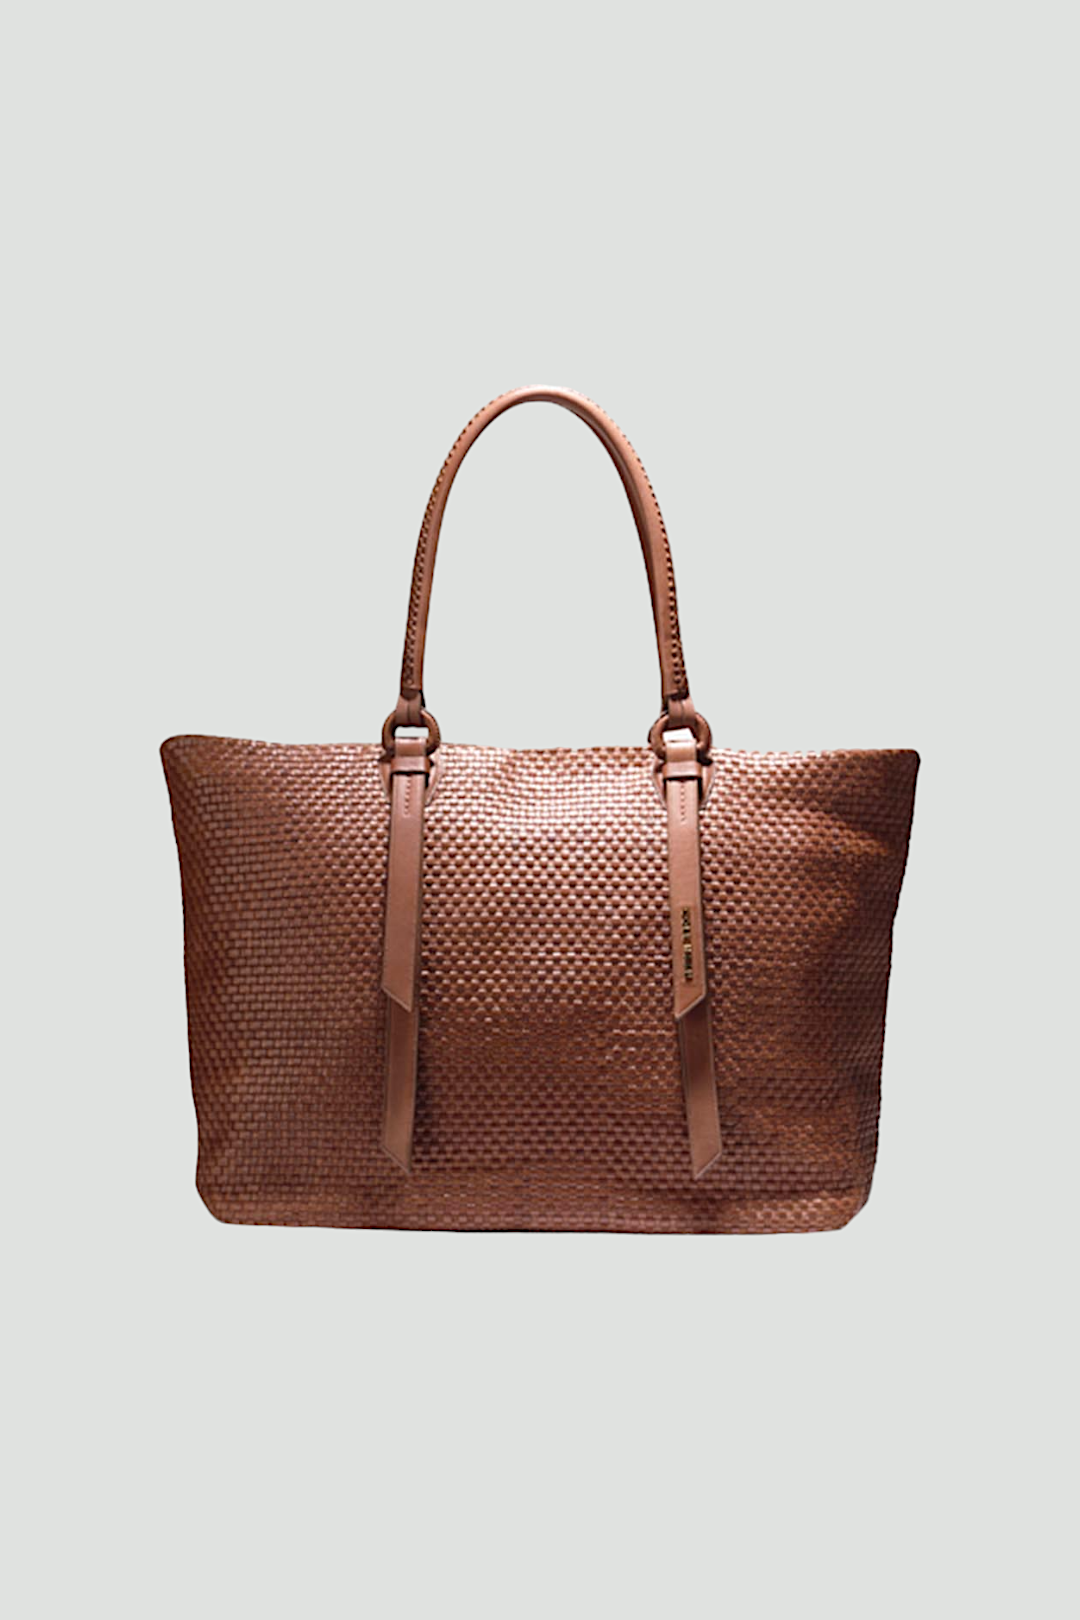 Cole Haan Bethany Weave Large Tote in Medium Brown